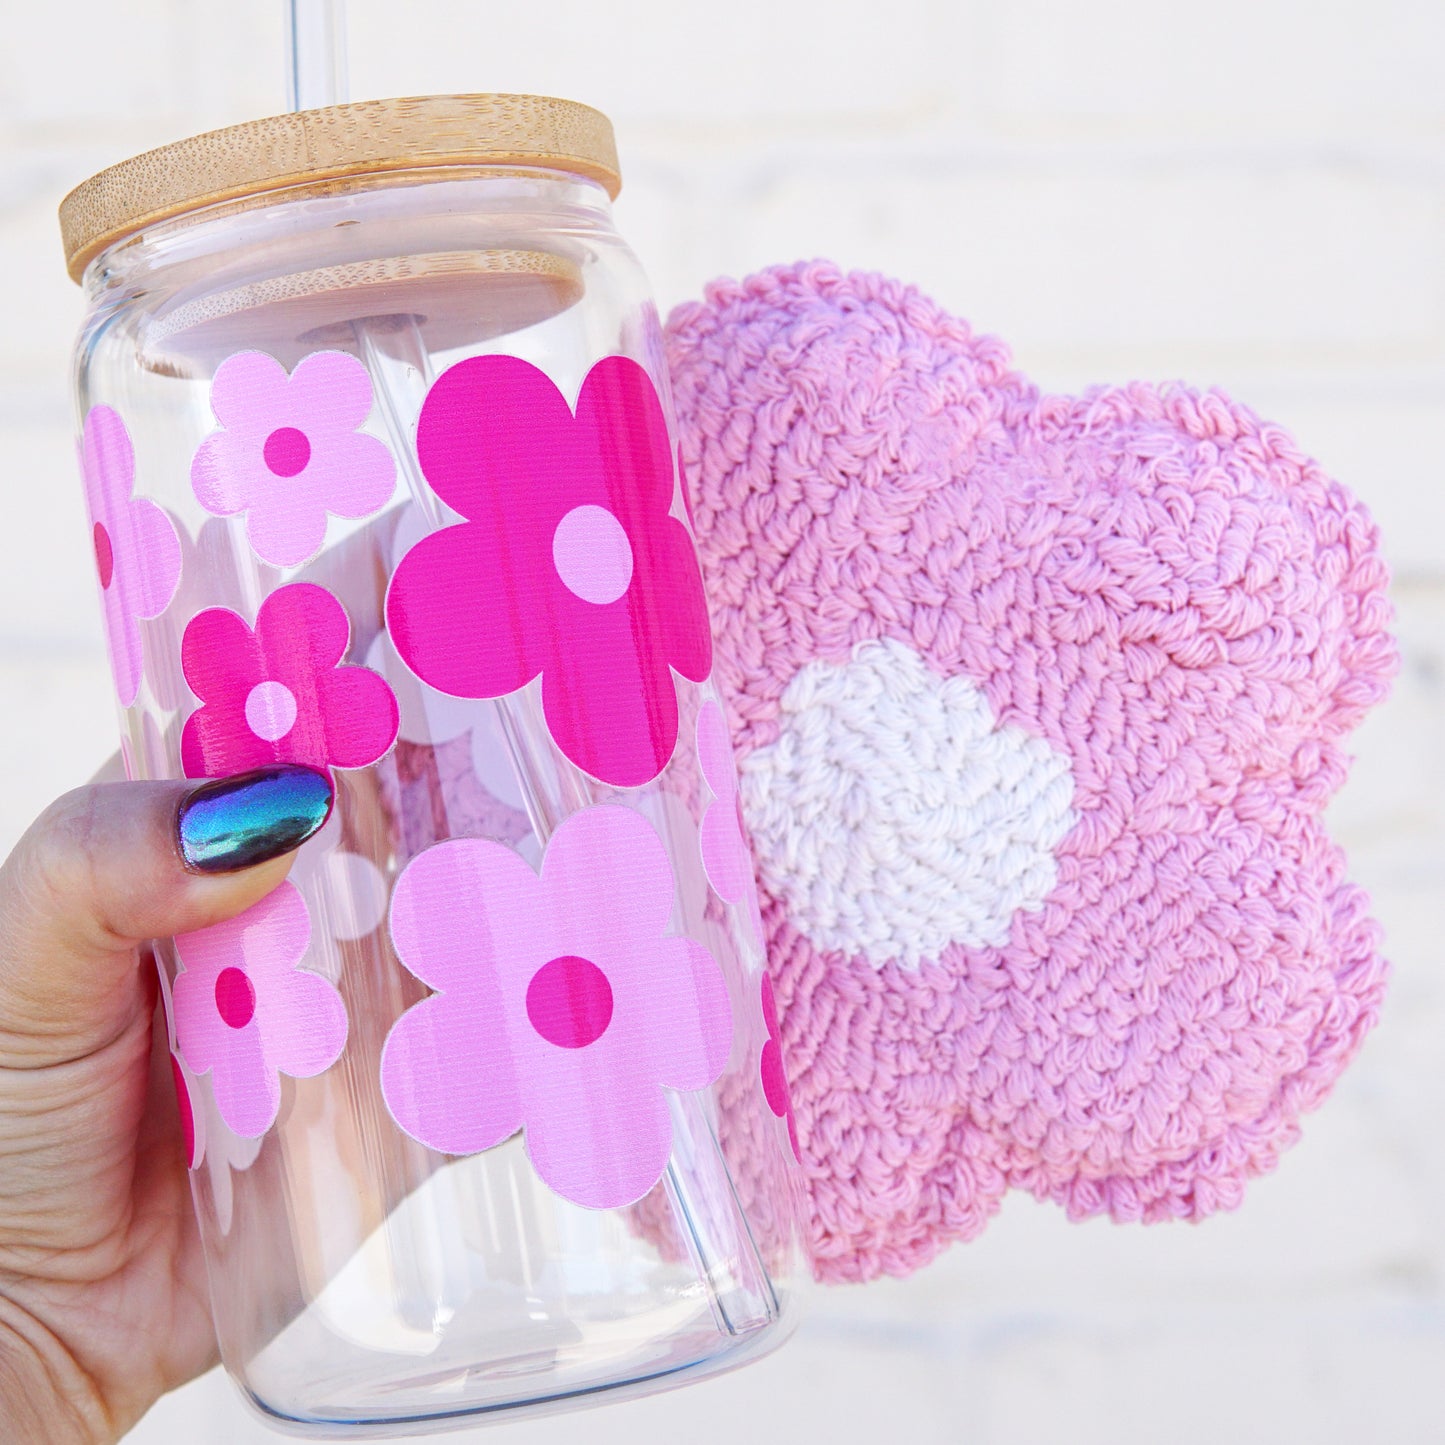 16oz Cute Pink Daisy Glass Can Cup and Mug Rug Gift Set